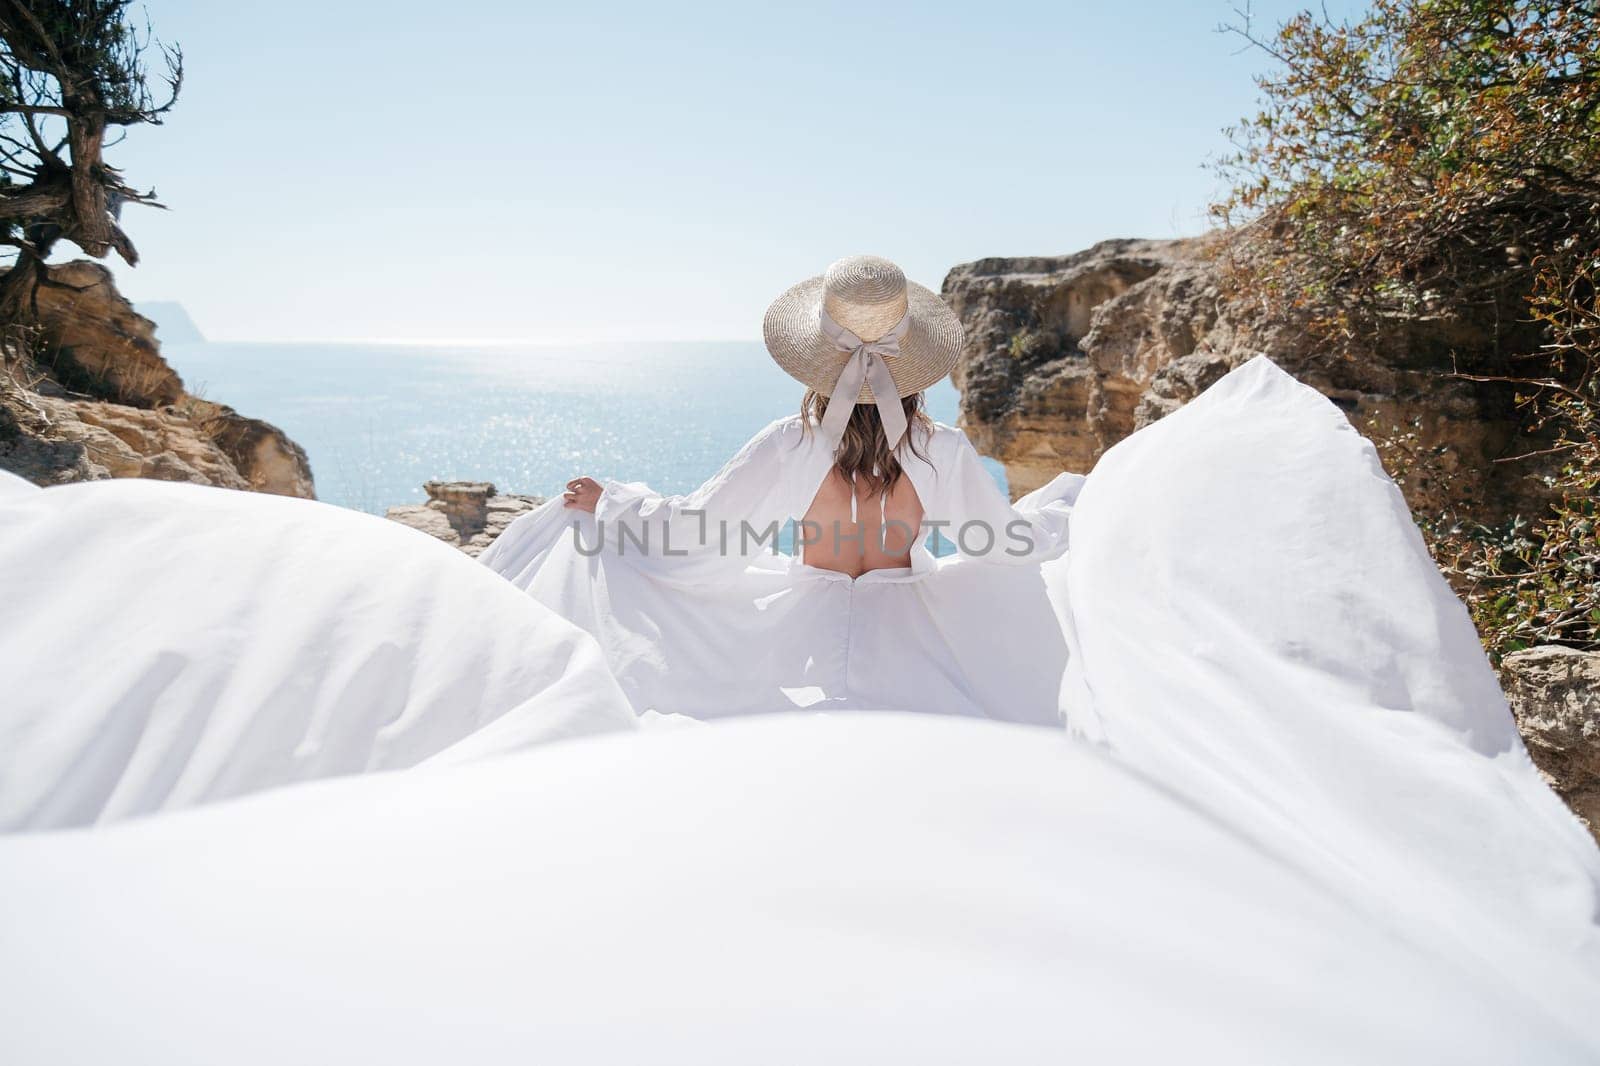 A woman in a white dress is standing on a rocky beach with her hat on. The scene is serene and peaceful, with the woman enjoying the view of the water by Matiunina